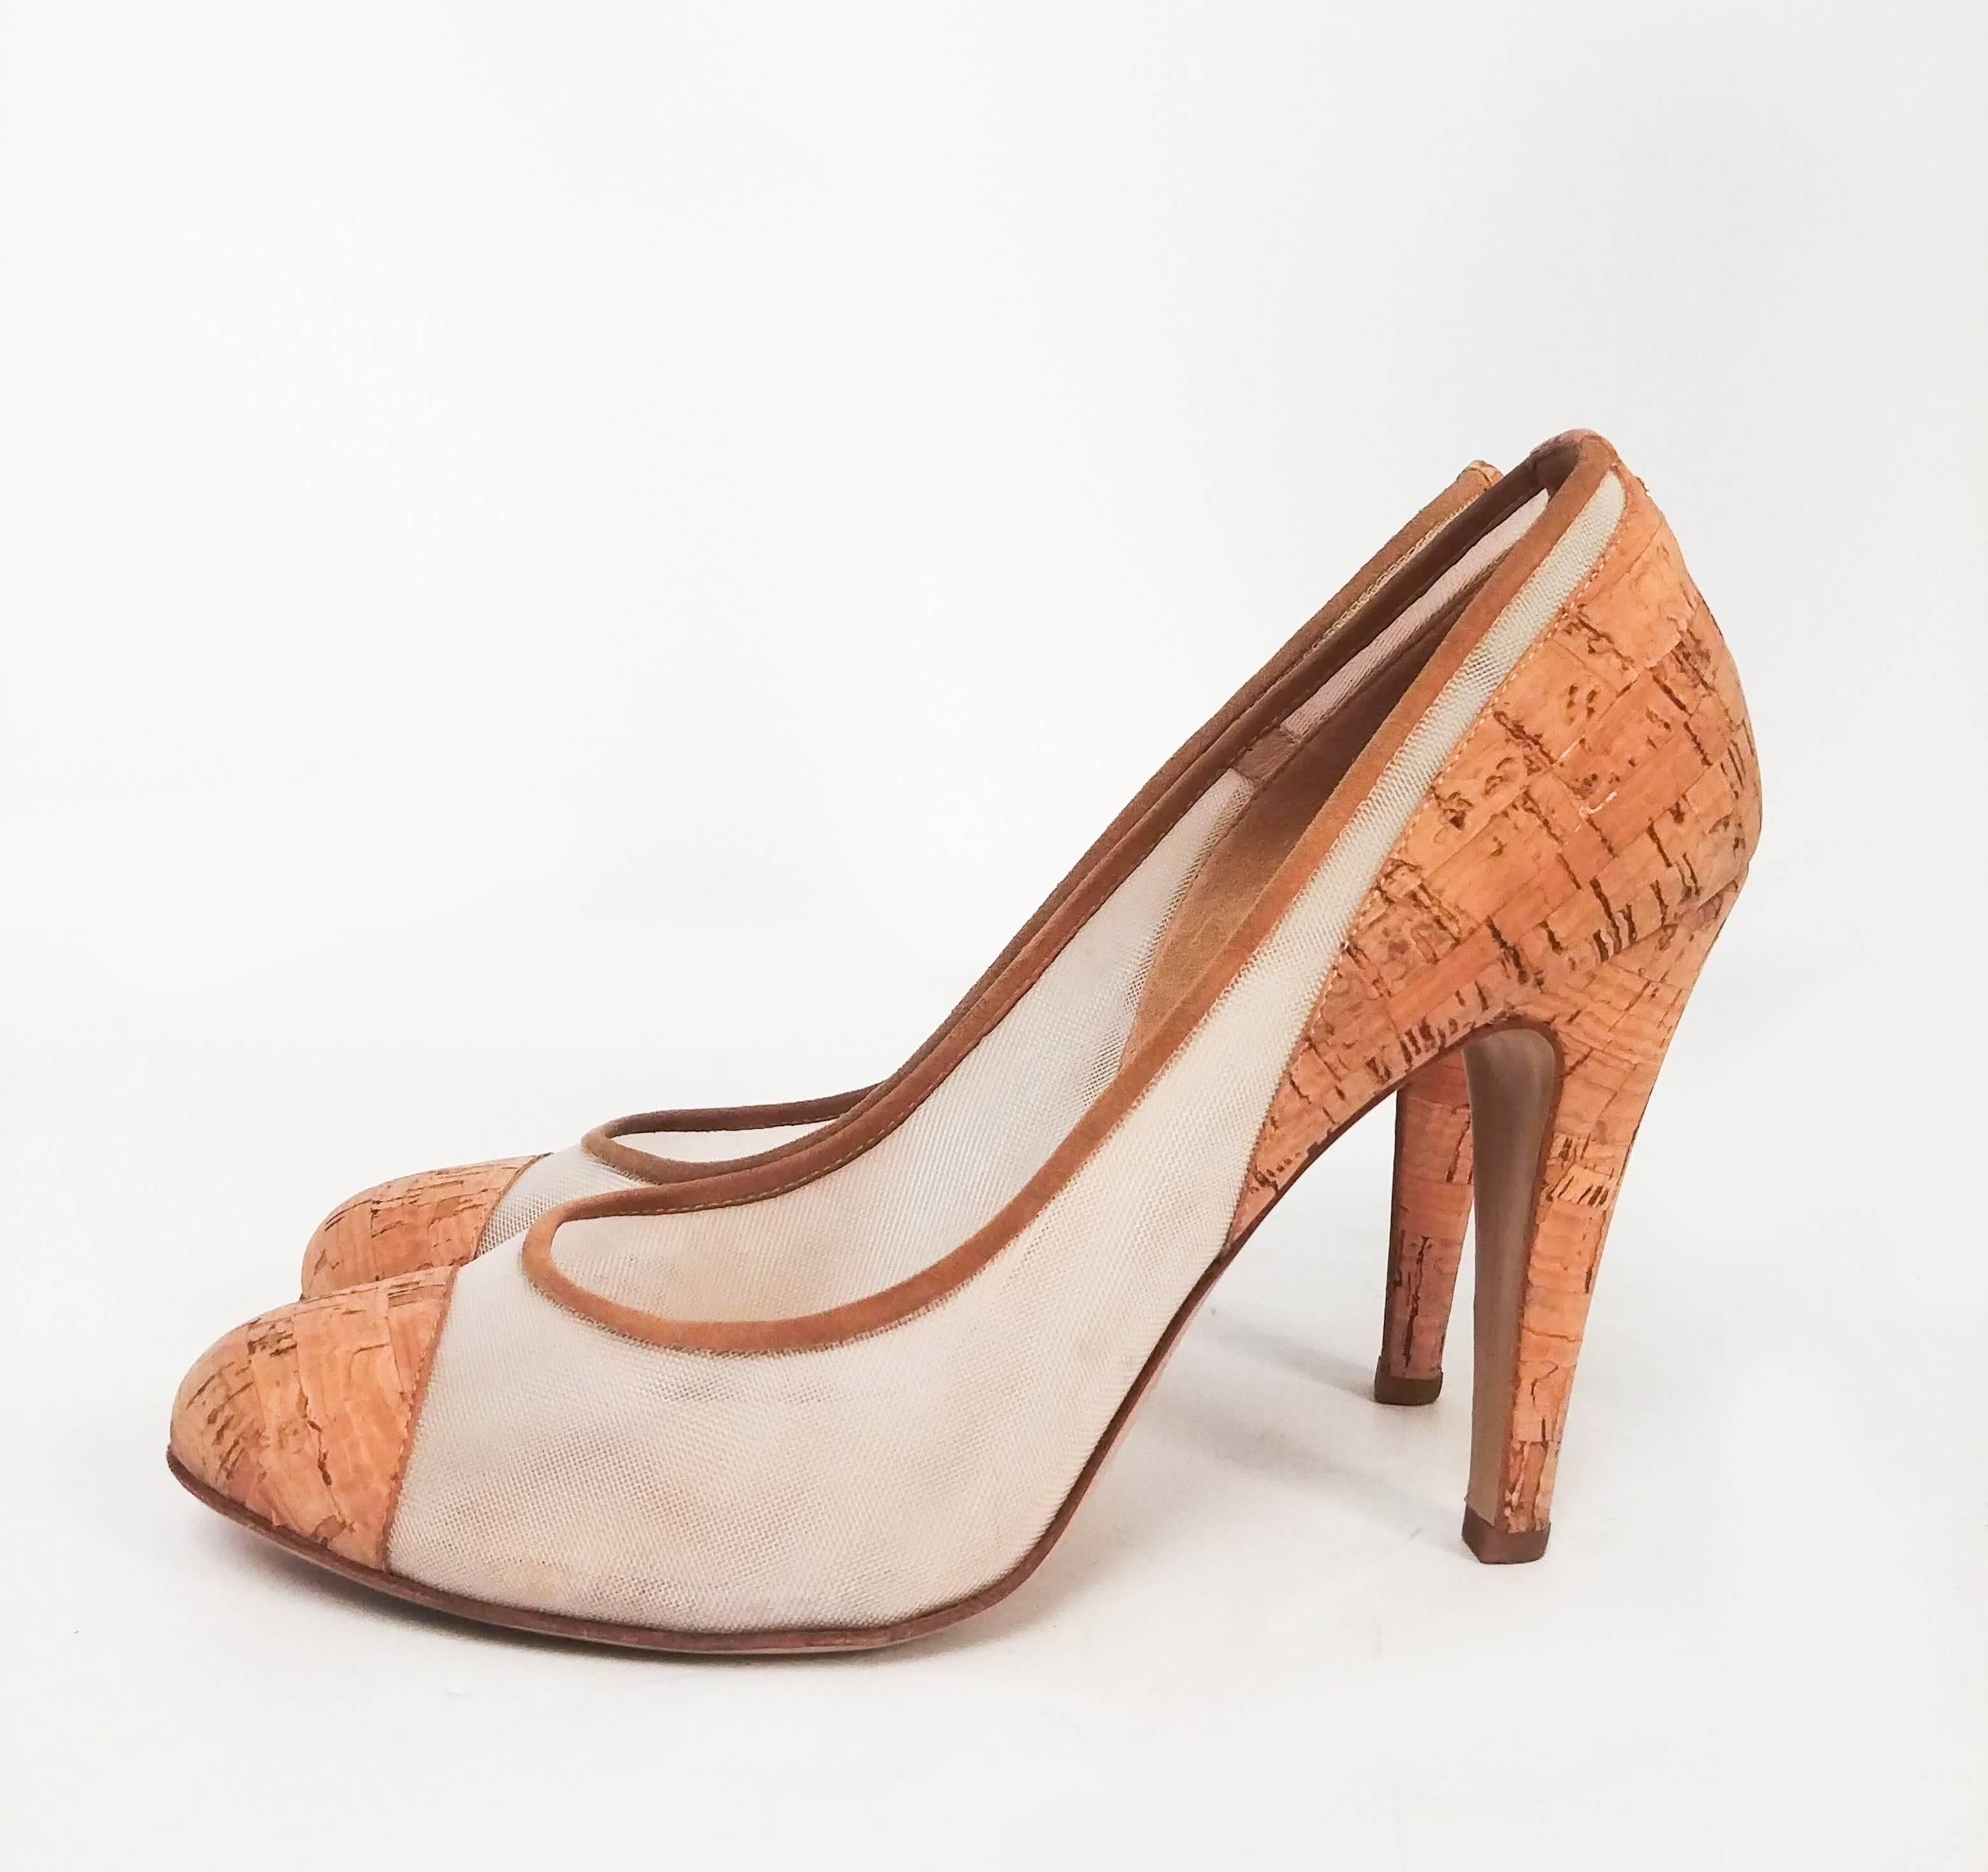 Chanel Cork Two Tone Pumps. Cork toe cap and heels and mesh uppers are an elegant twist on the classic Chanel two-tone shoe. Stiletto heel, double C logo at back. Barely worn.